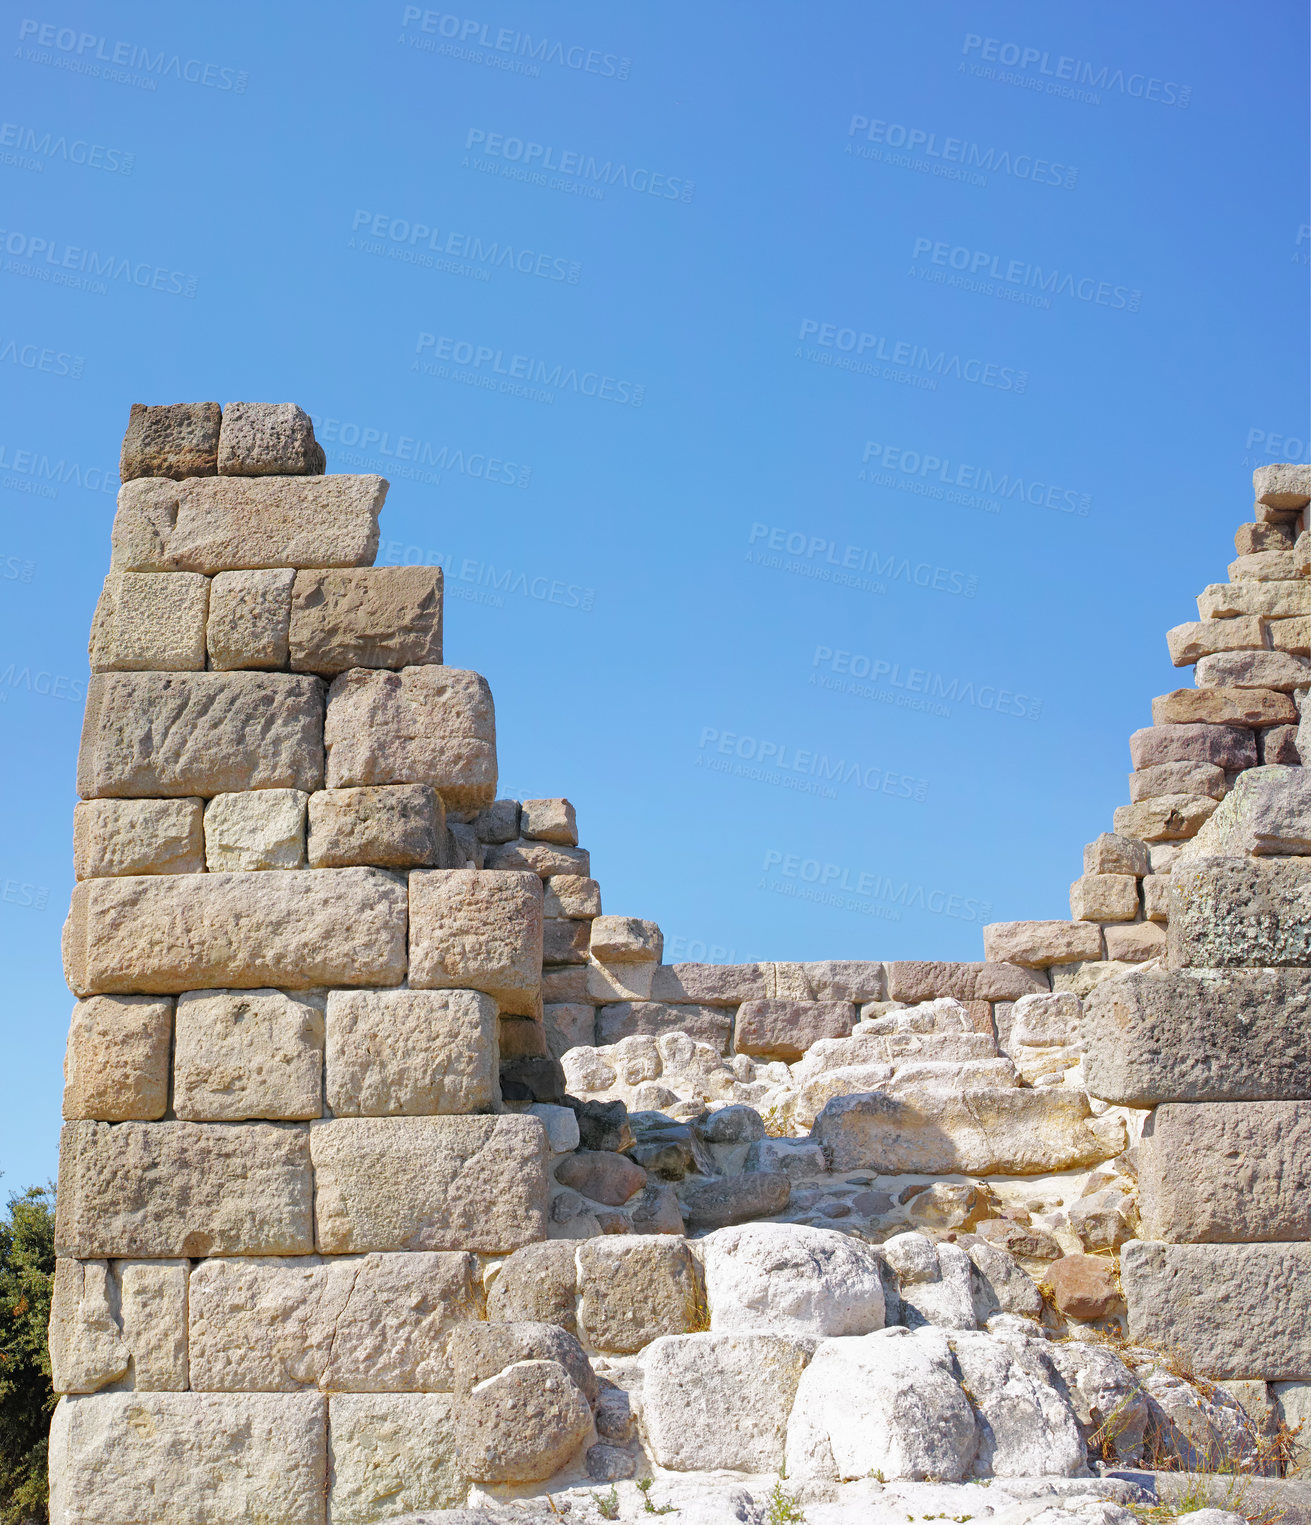 Buy stock photo Myndos Gate in the old city wall (now Bodrum)- dates from 364 B.C. The 7 km long city wall surrounds the town from the west side of the harbor to Goktepe. Castles at Salmakis to the west and Zephyrion to the east mark the junction of the city wall and the harbor.